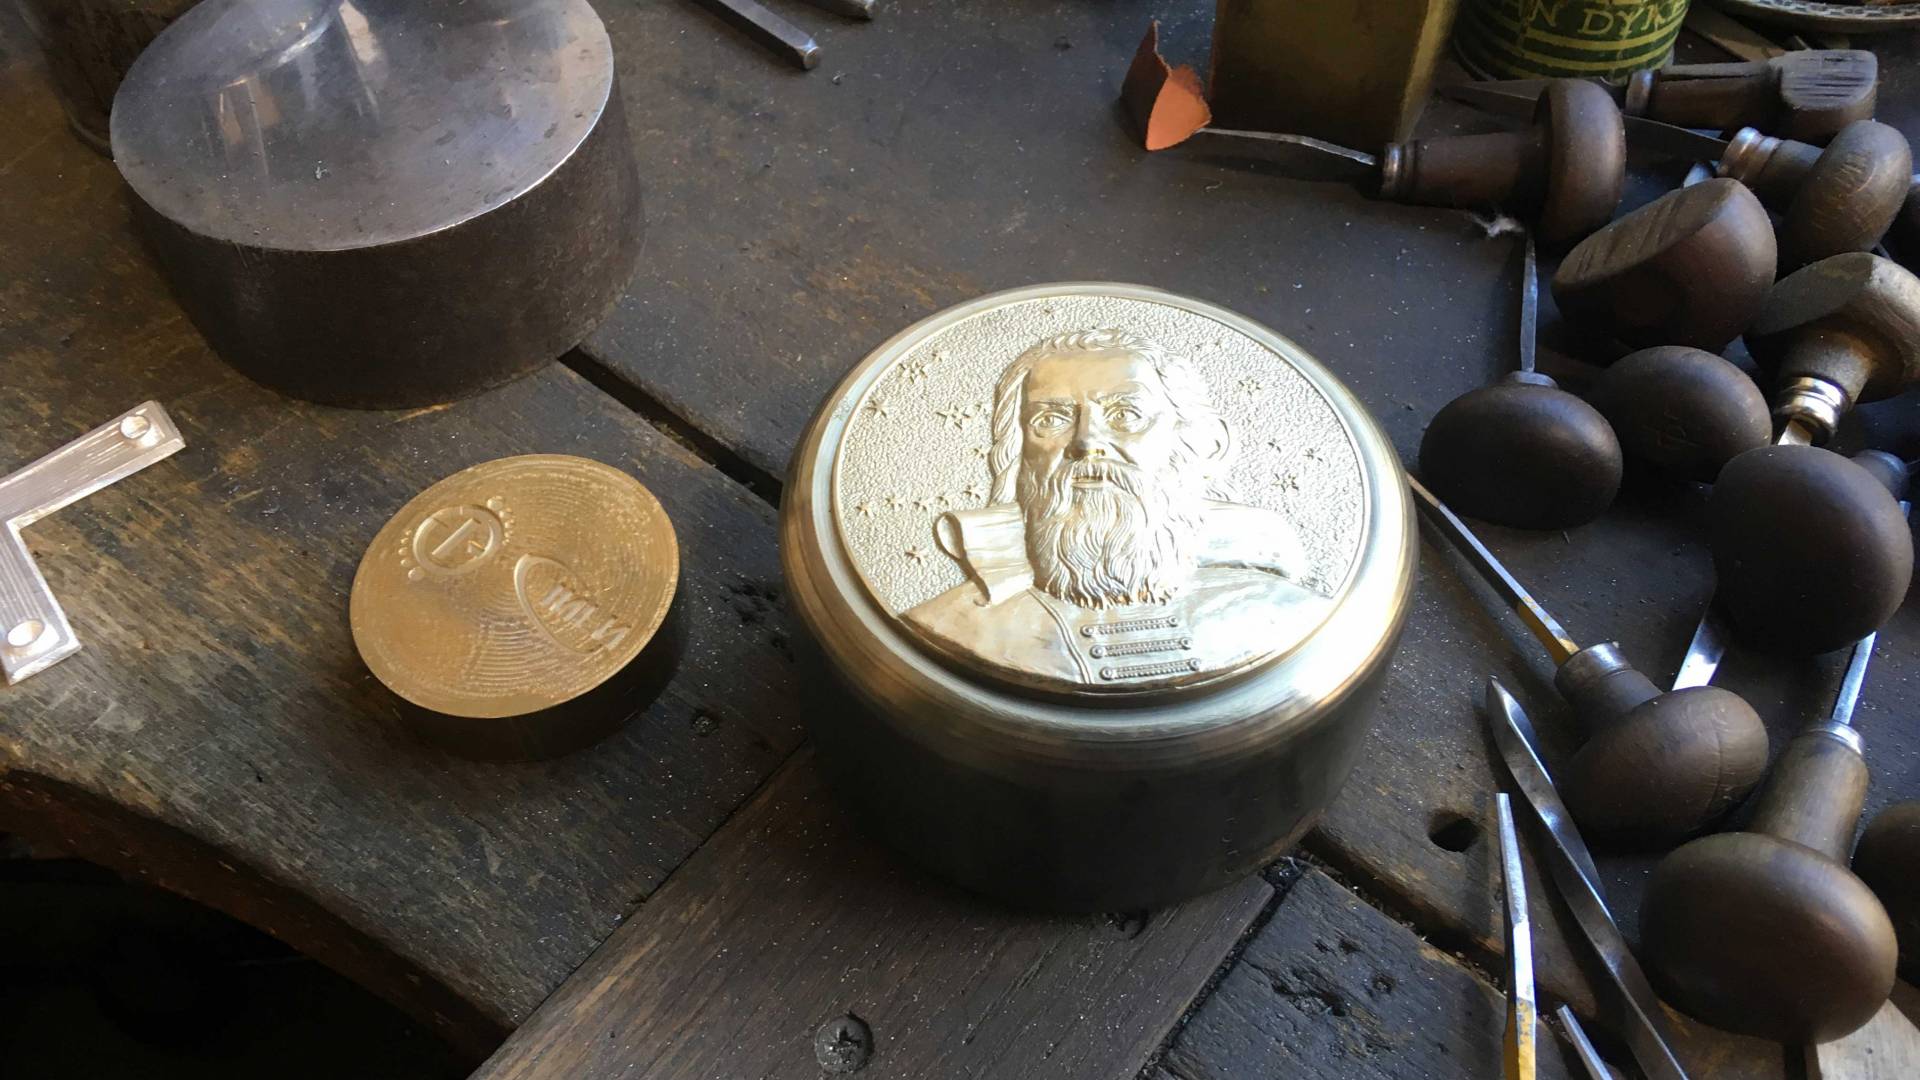 Galileo Medal surrounded by artisan tools